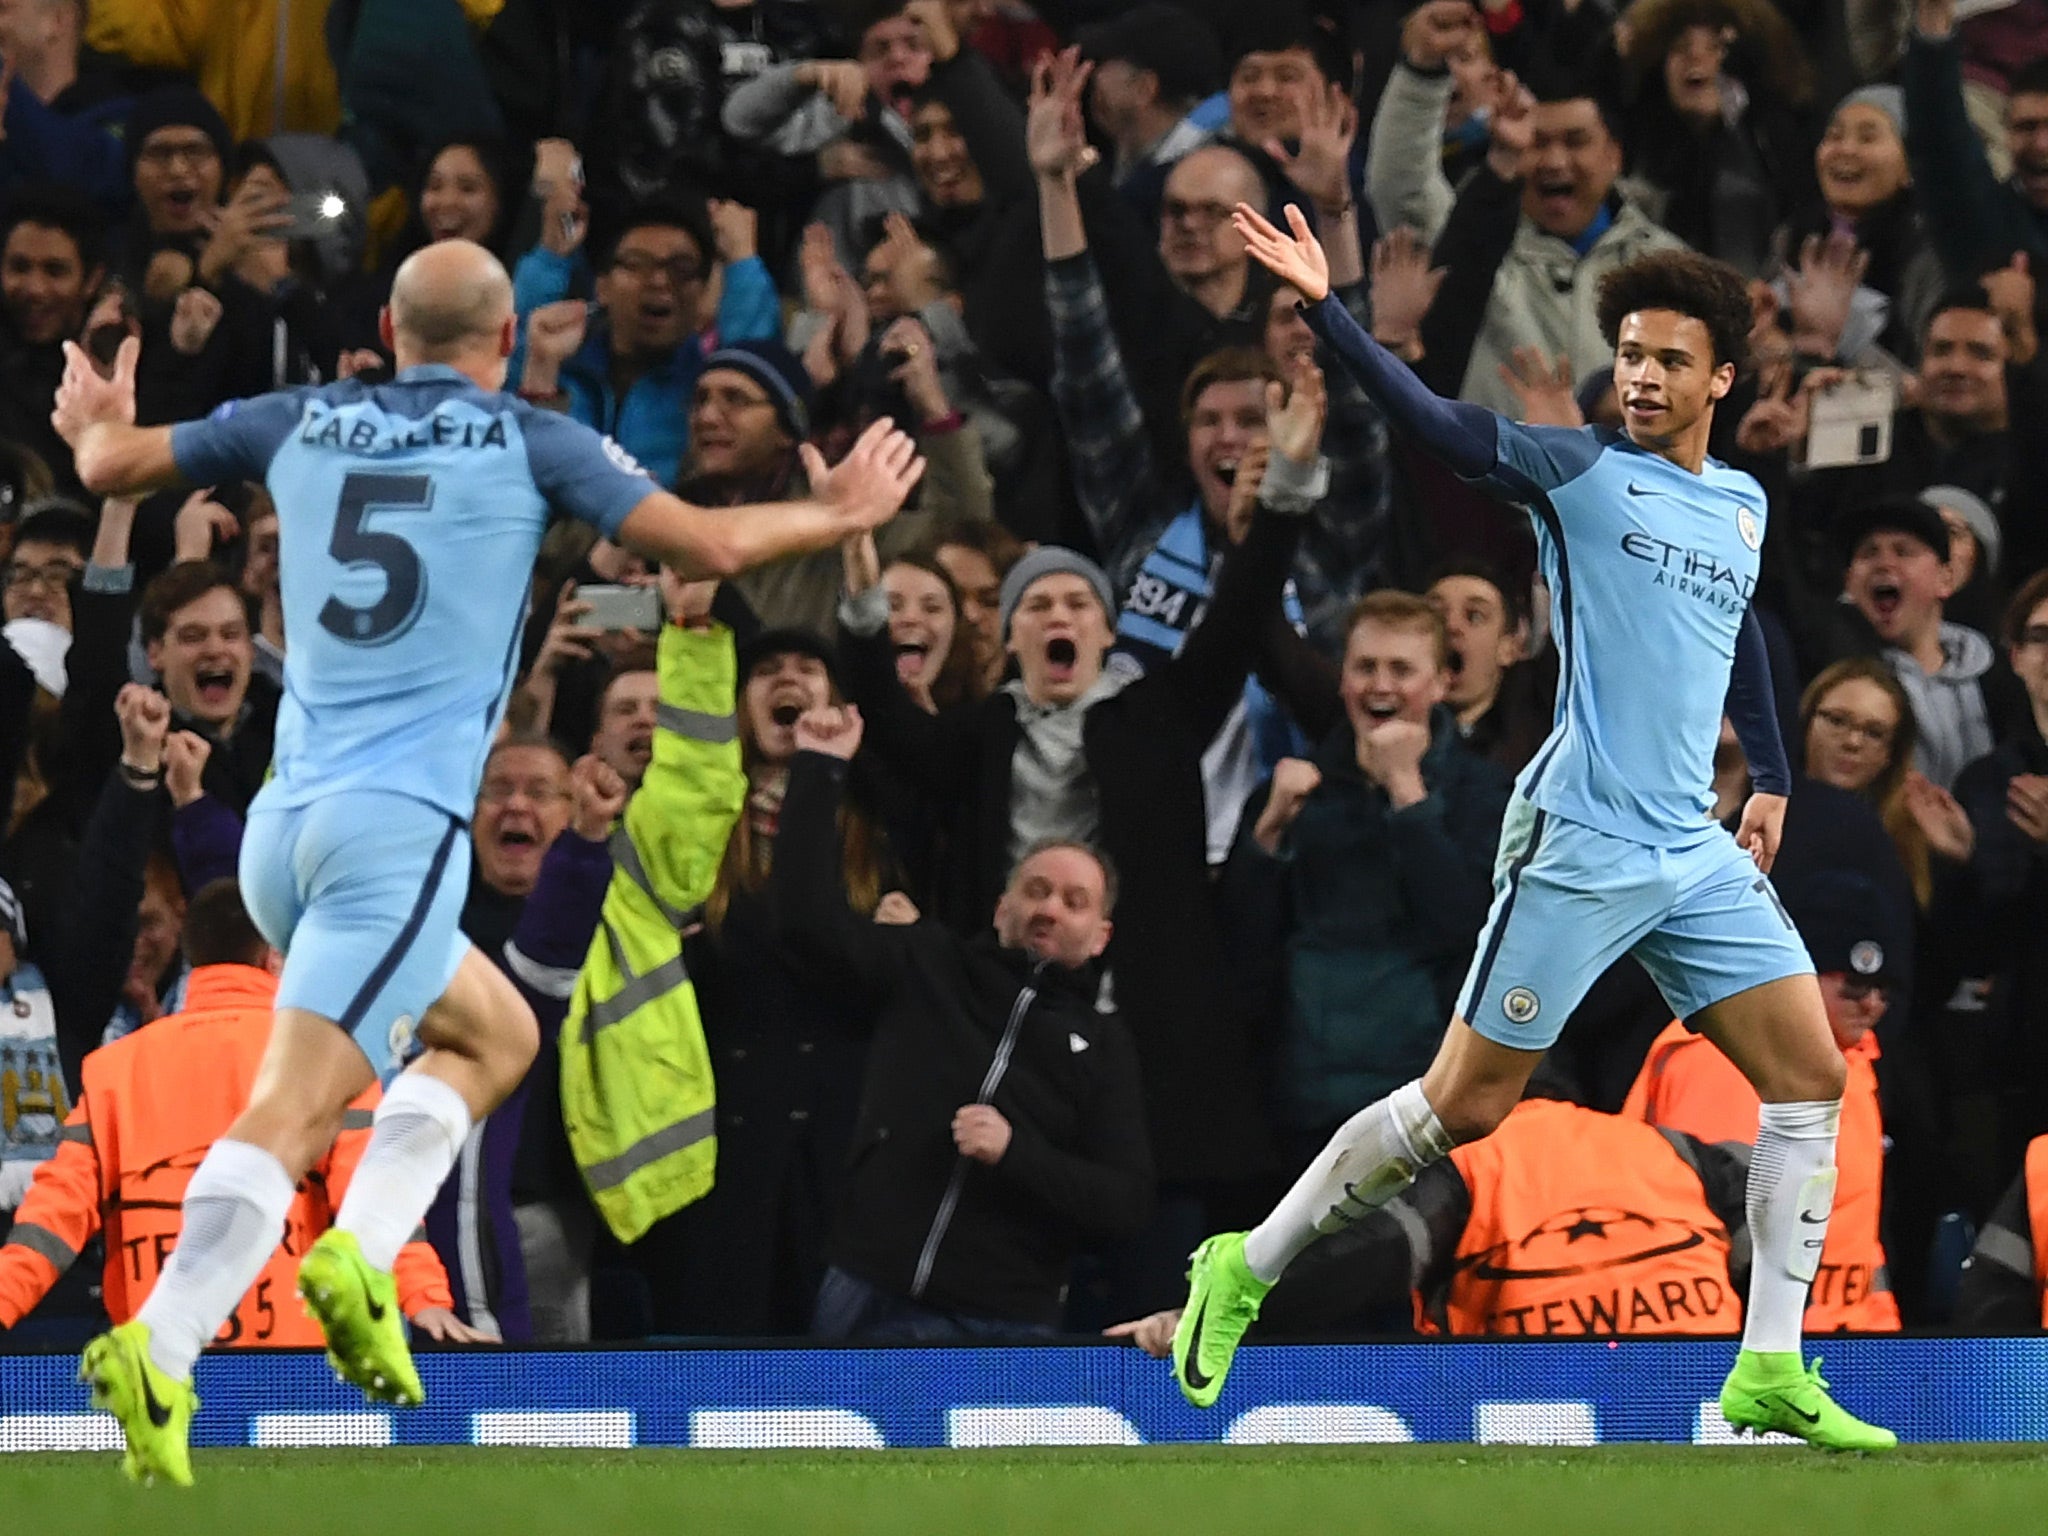 Leroy Sane scored Manchester City's fifth and final goal of an incredible game